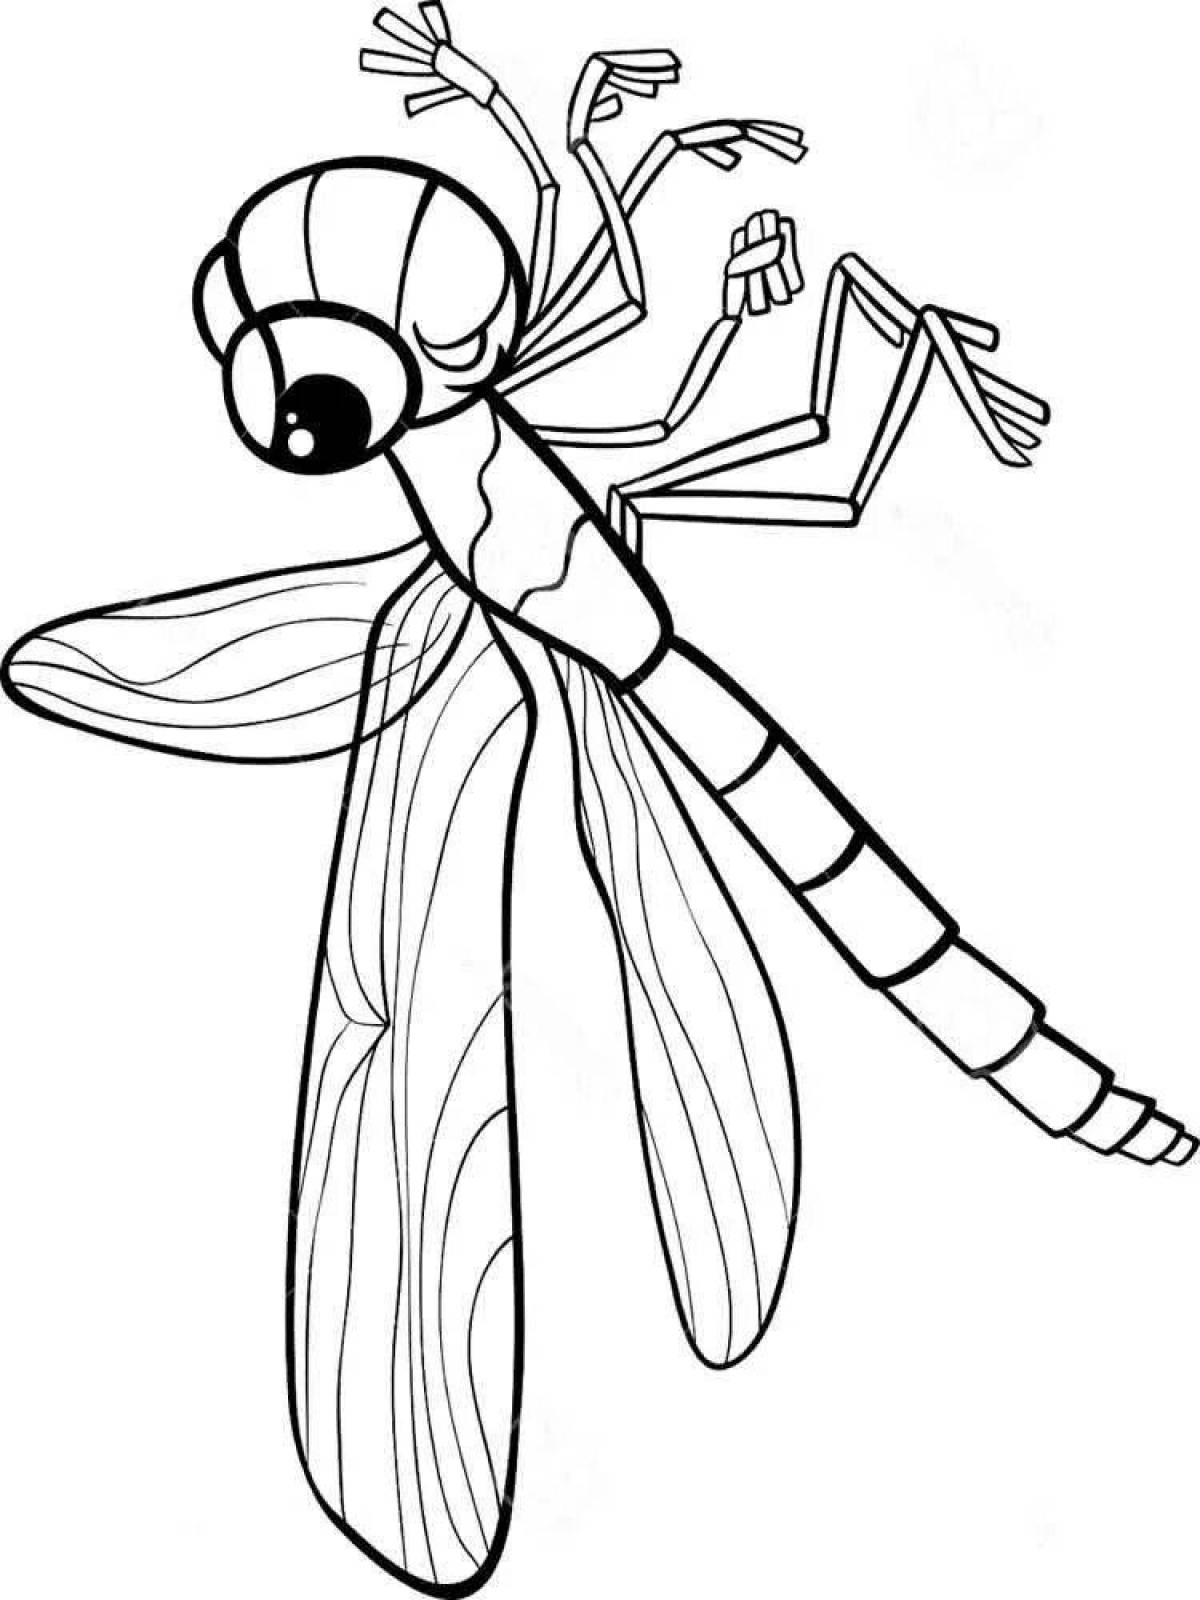 Cute dragonfly coloring book for kids